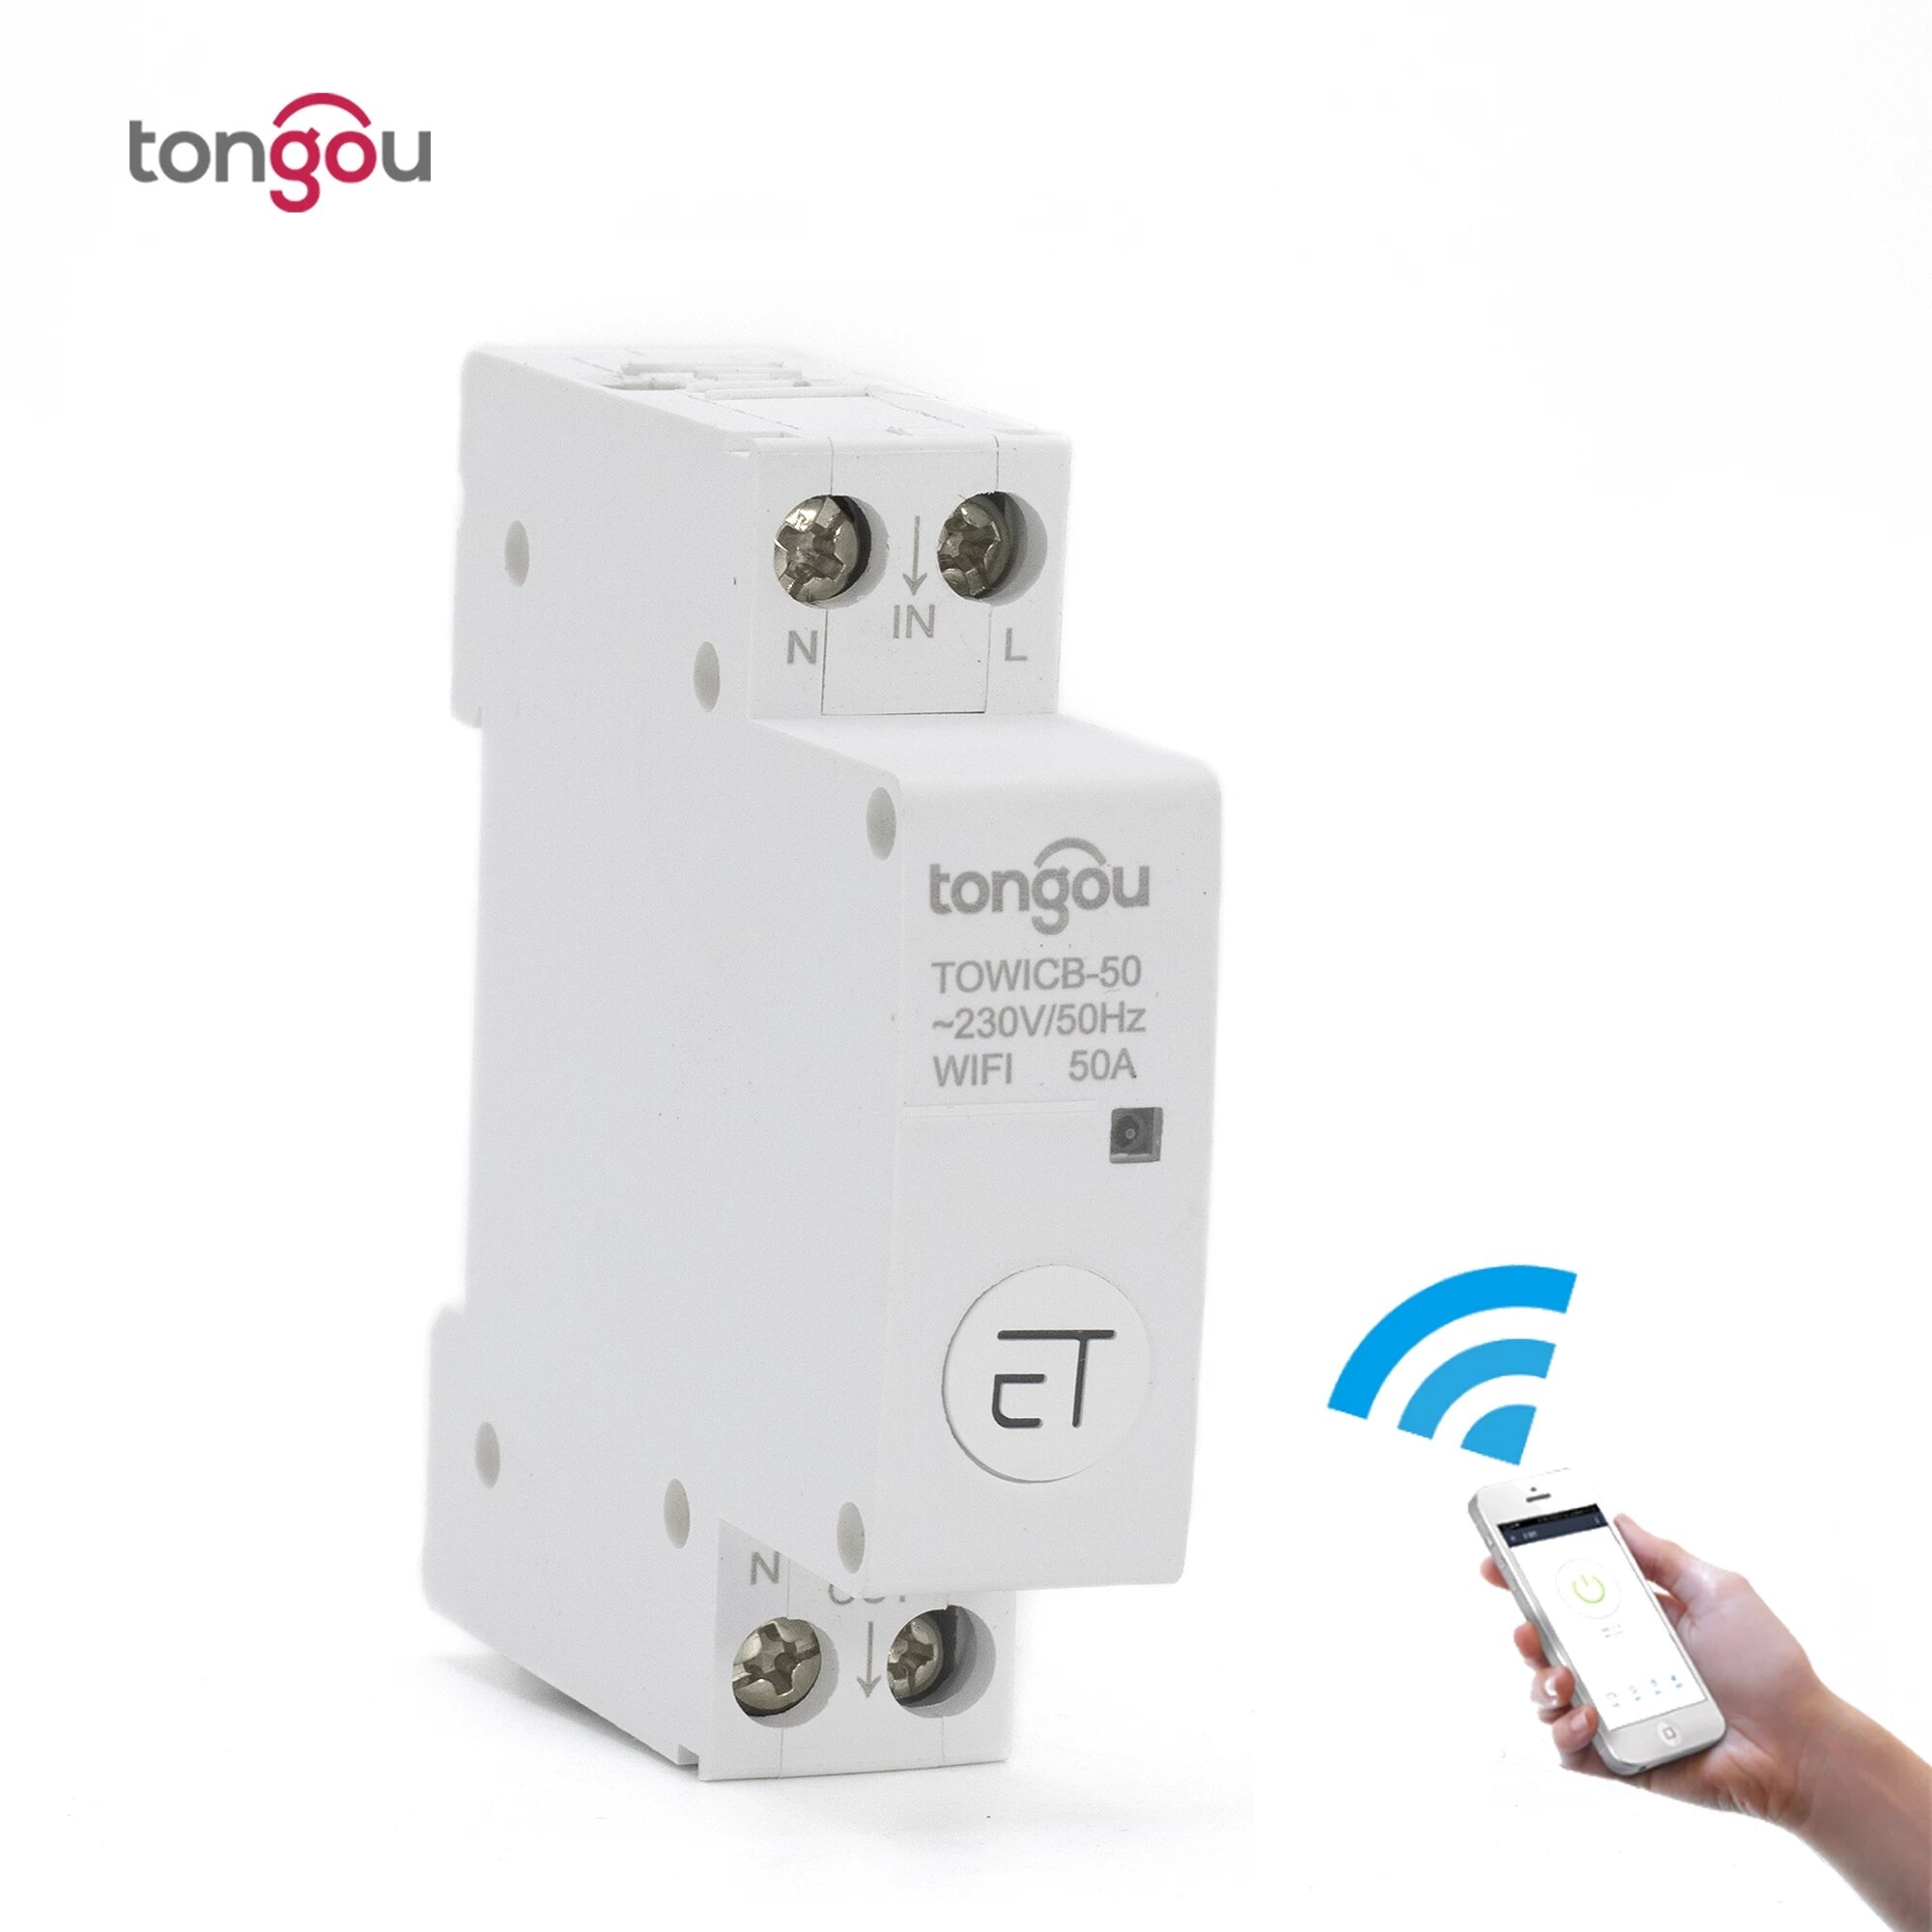 

Tongou TOWICB-50 WiFi Circuit Breaker Remote Control by eWeLink APP Voice Control With Amazon Alexa Google Home 18mm Din